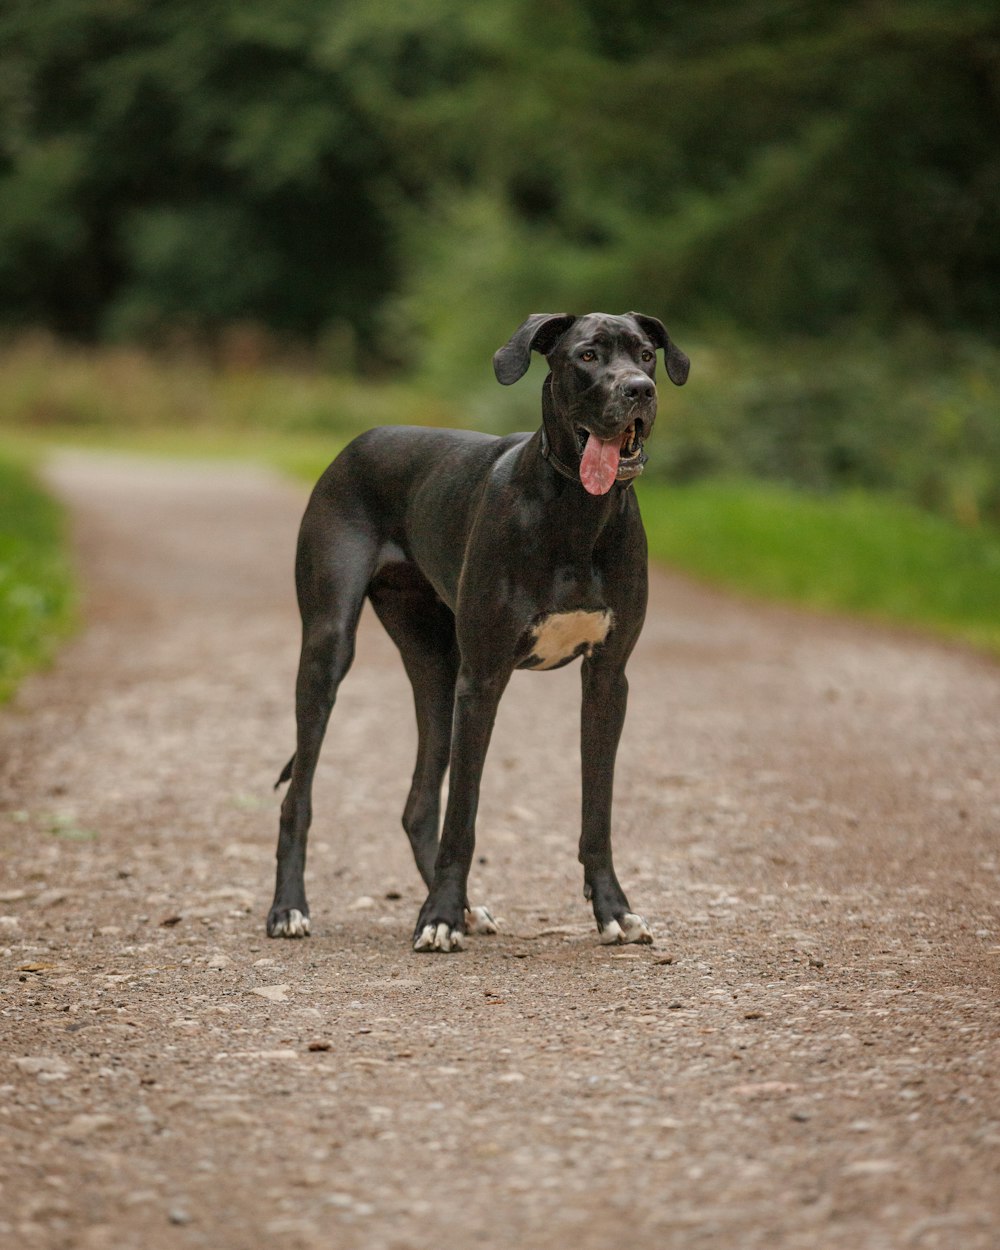 a large black dog standing on a dirt road